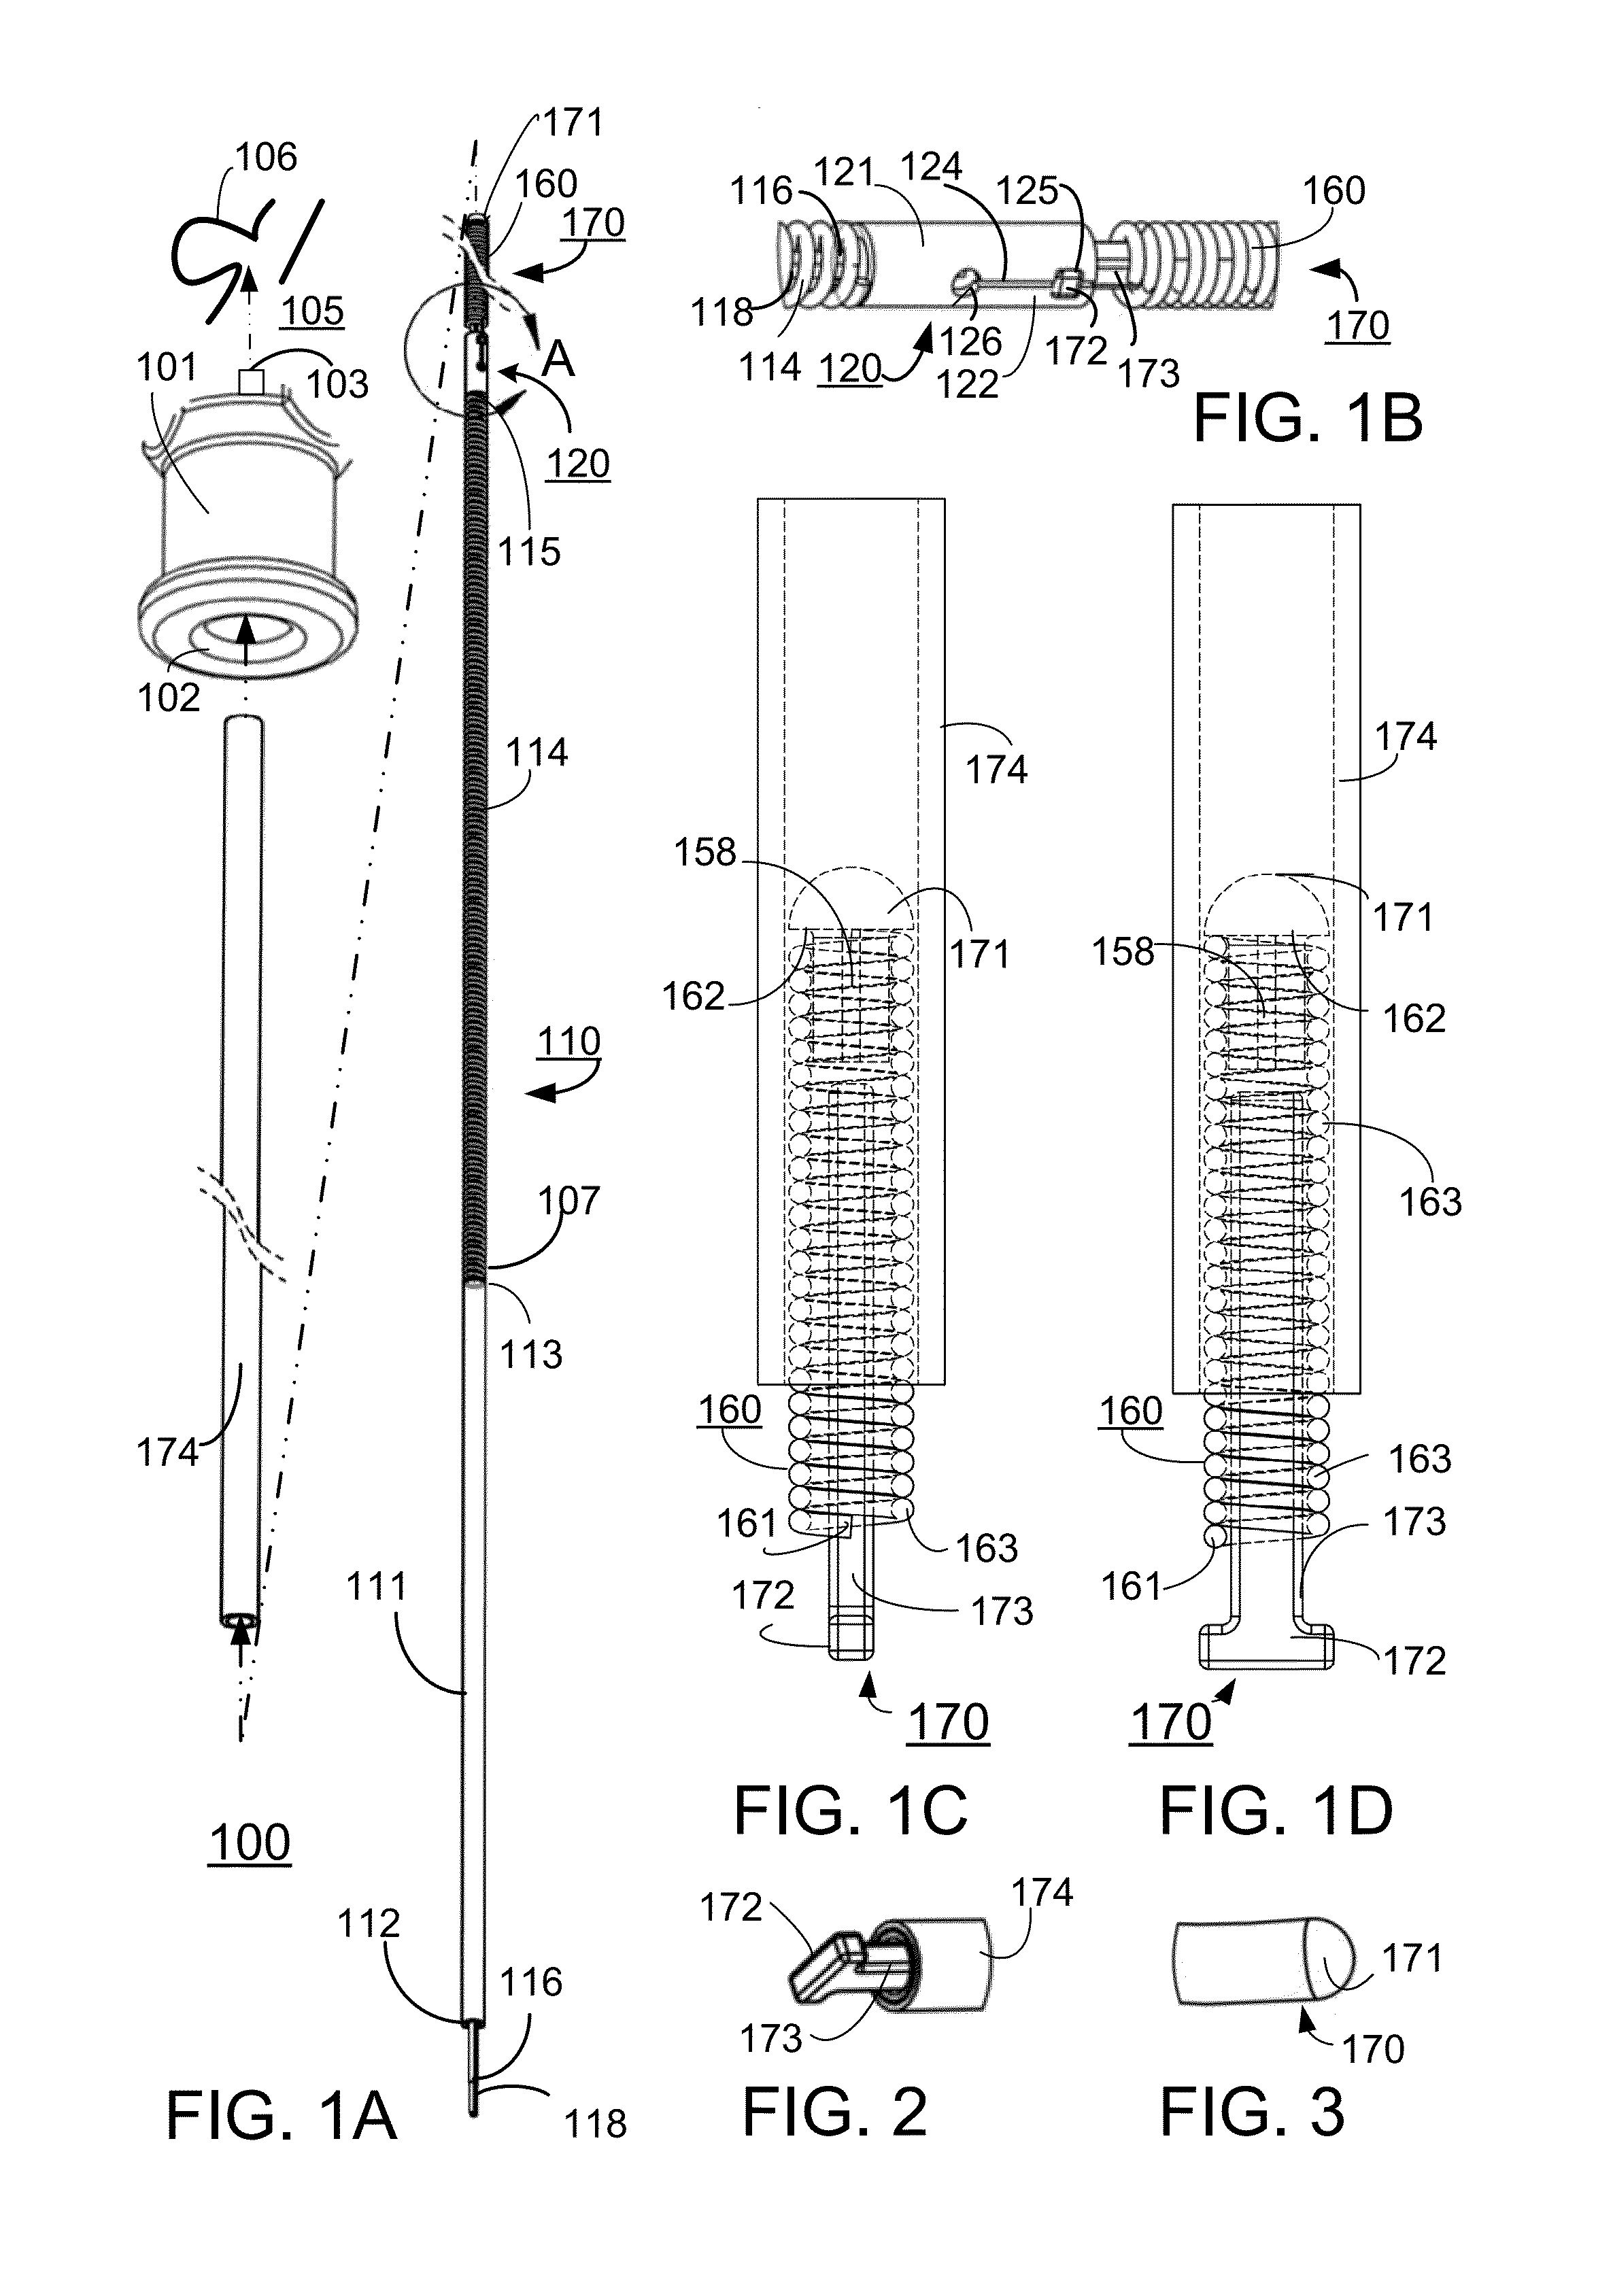 Retractable and rapid disconnect, floating diameter embolic coil product and delivery system